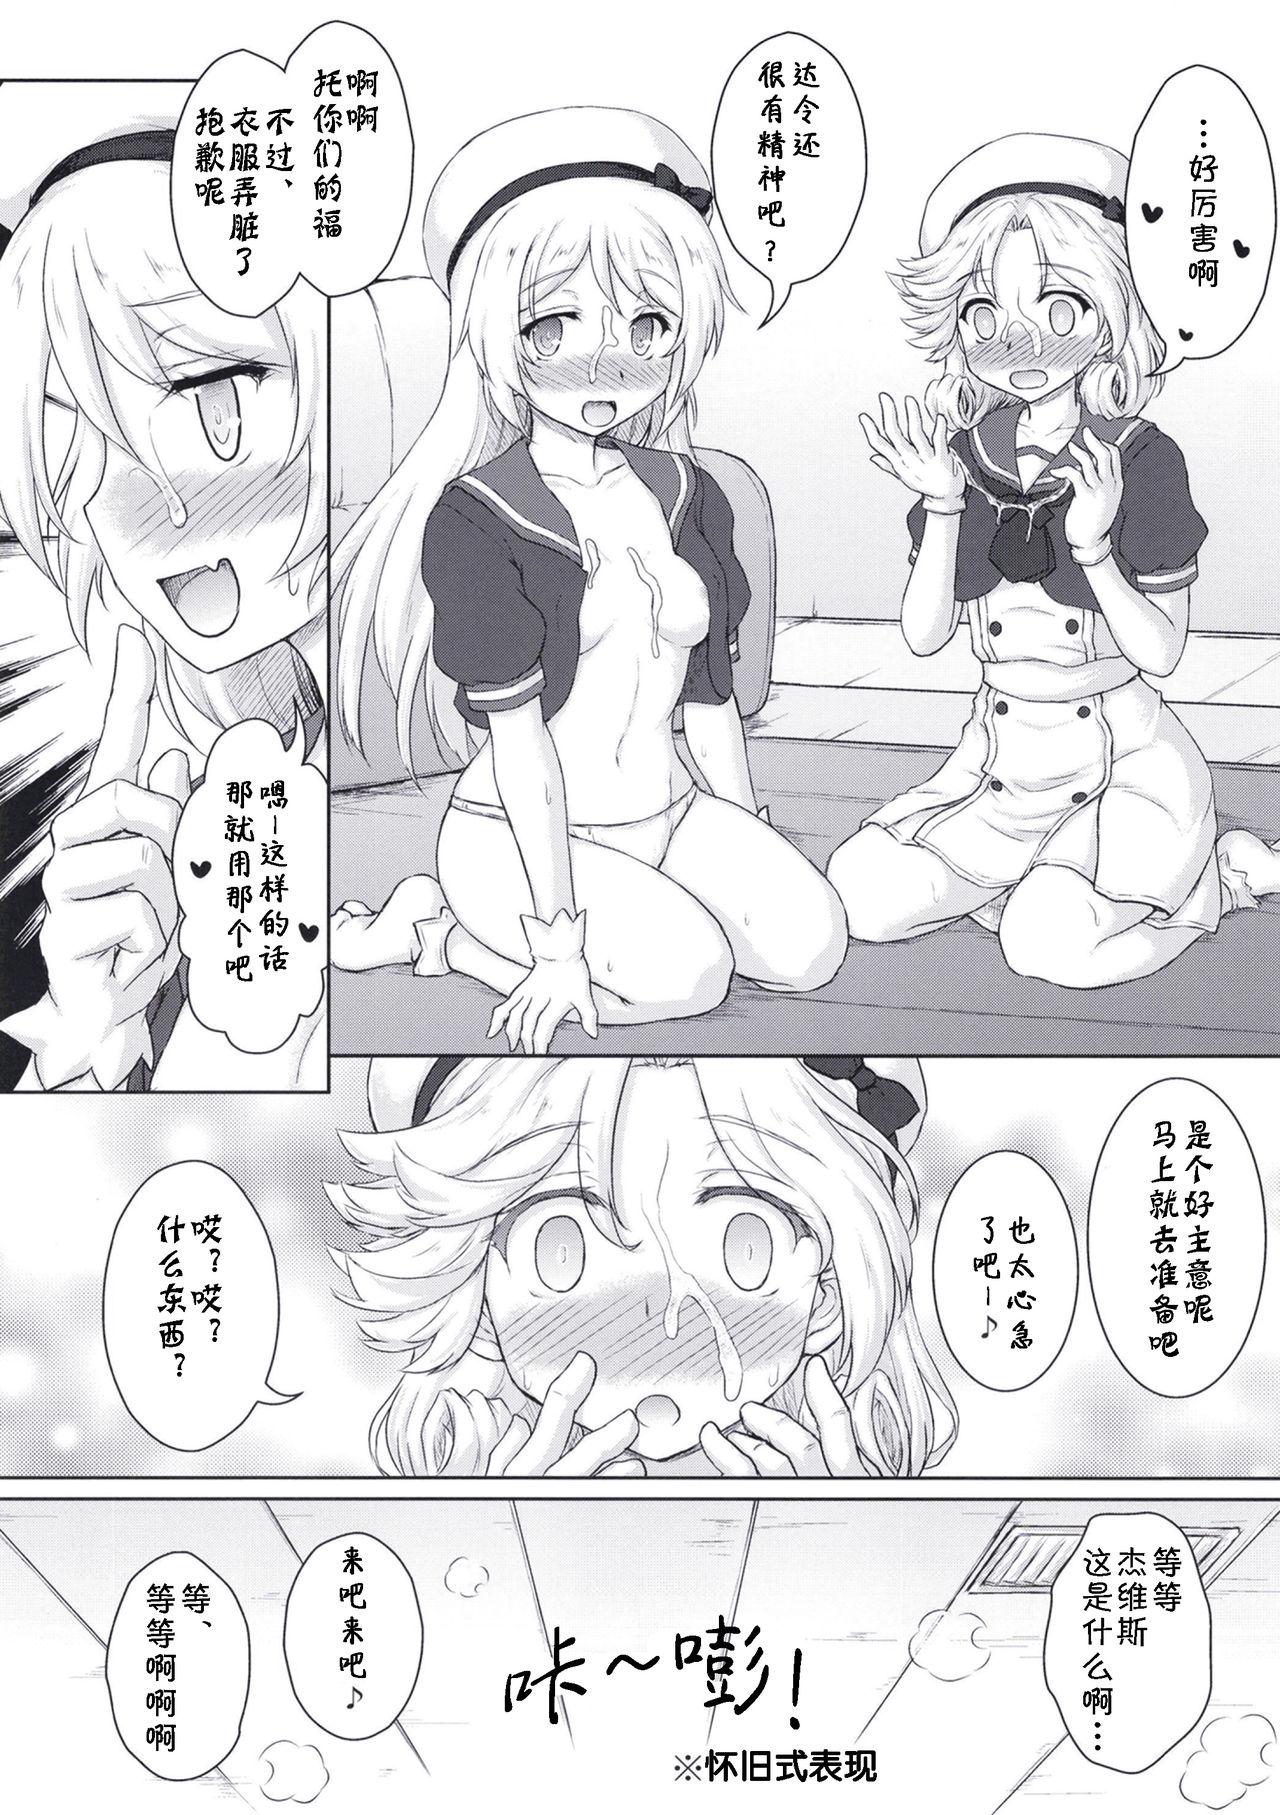 Casting Darling is in sight! act2 - Kantai collection Gay Reality - Page 12